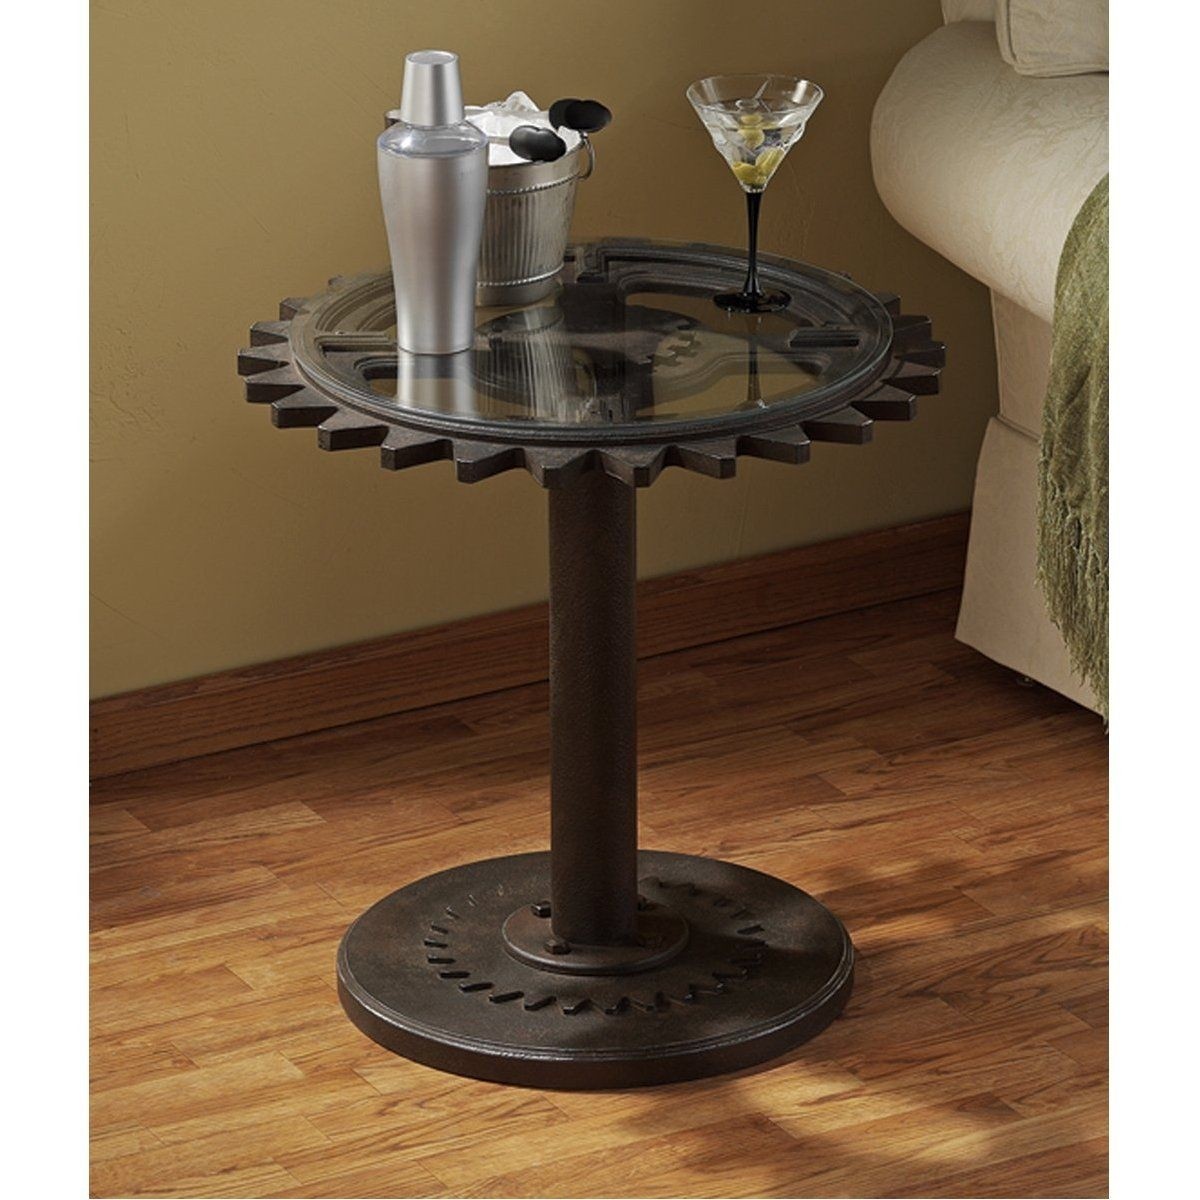 Vintage Industrial Style Factory Gears Side Table Decorative Art Glass Top